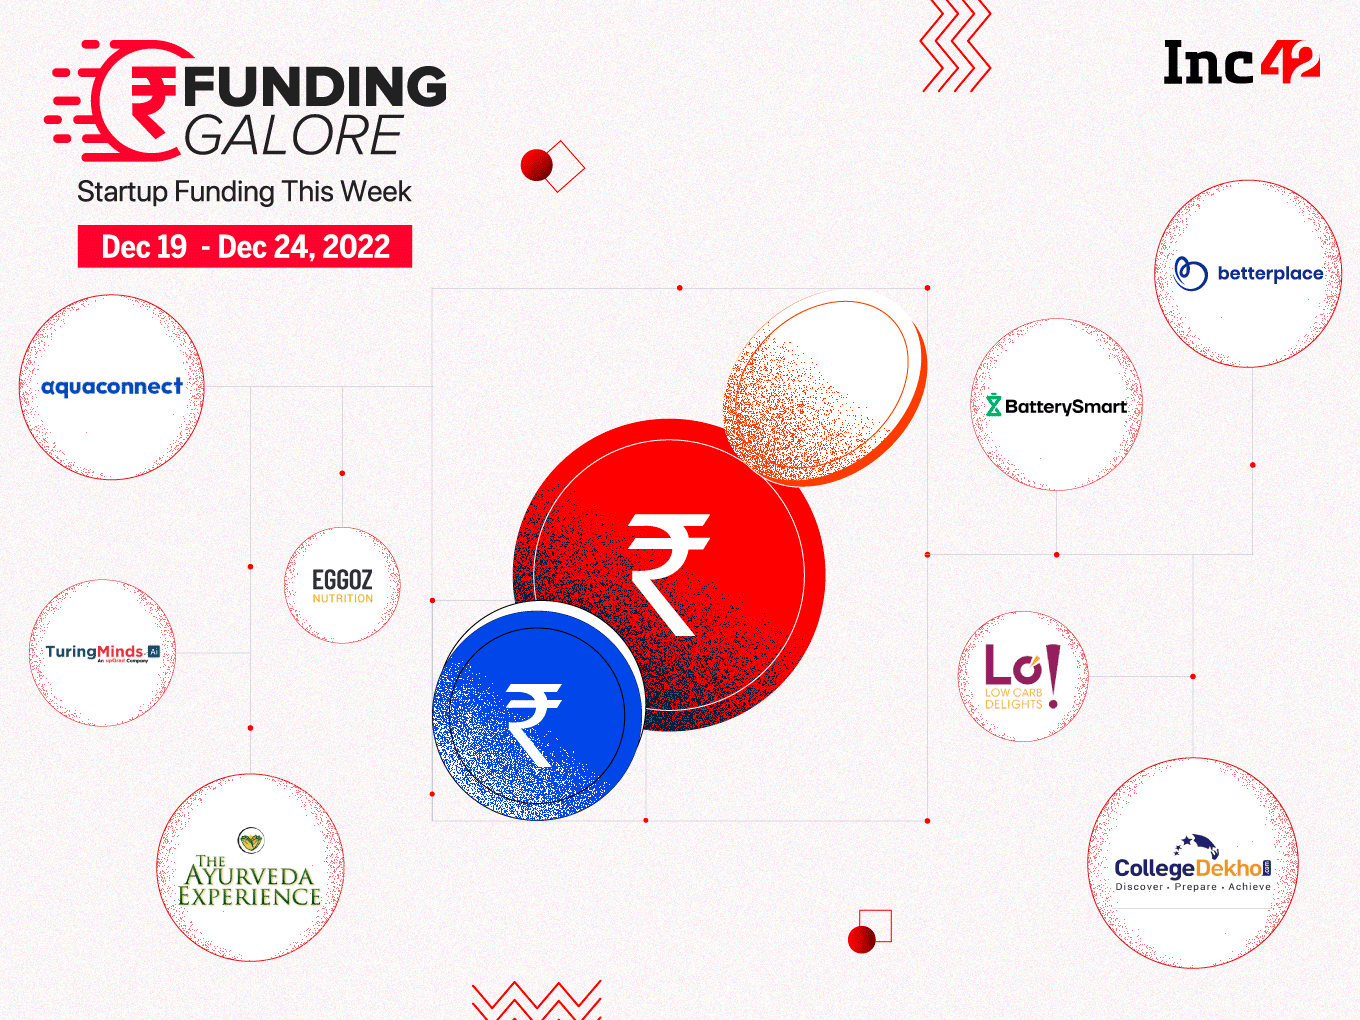 [Funding Galore] From BetterPlace To Eggoz — Indian Startups Raised $97 Mn This Week